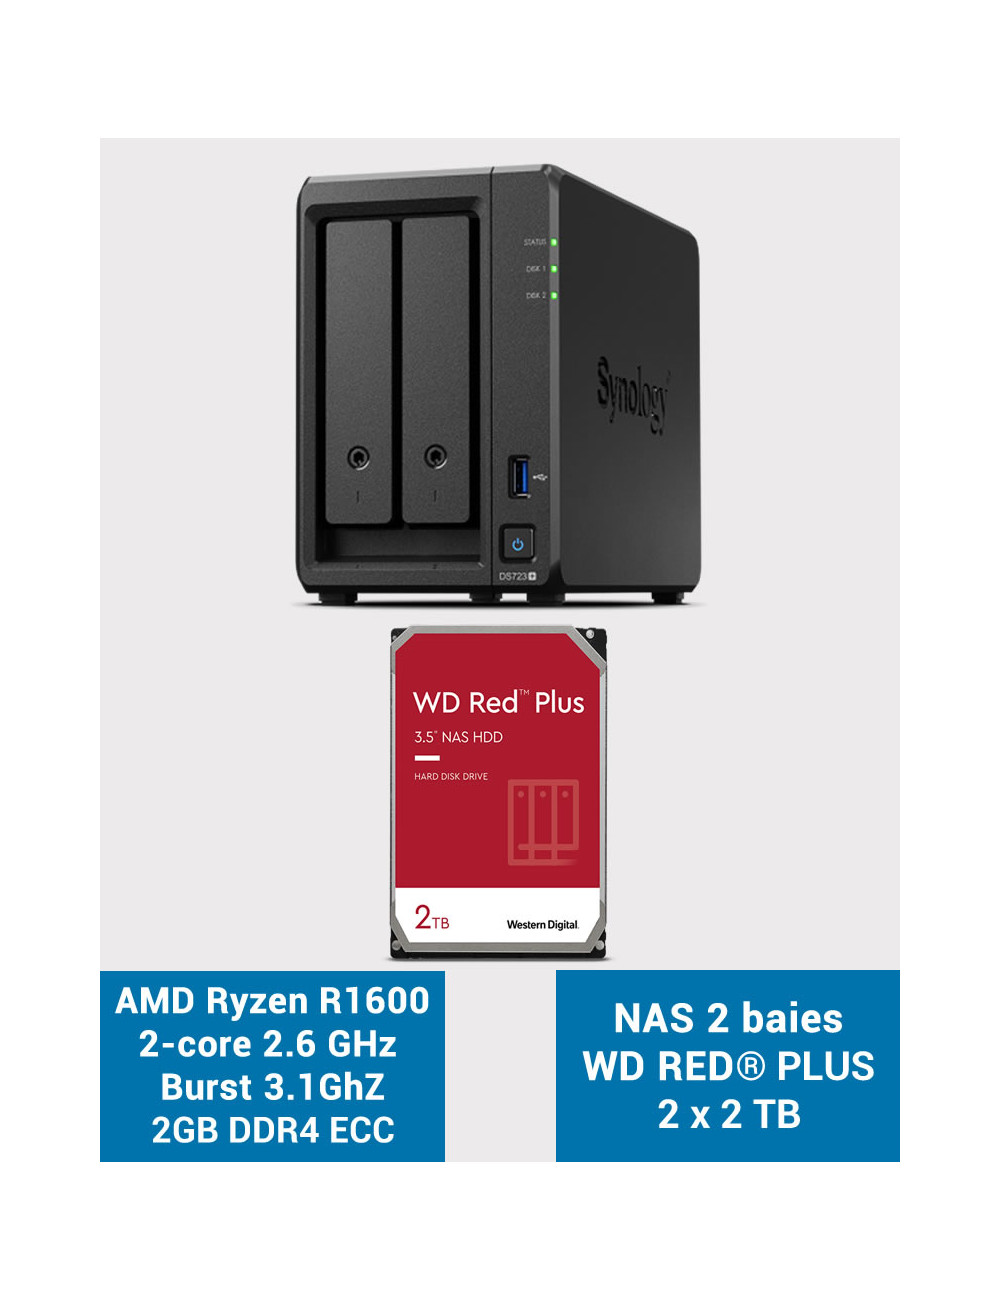 Synology DS723+ Servidor NAS WD RED PLUS 4TB (2x2TB)